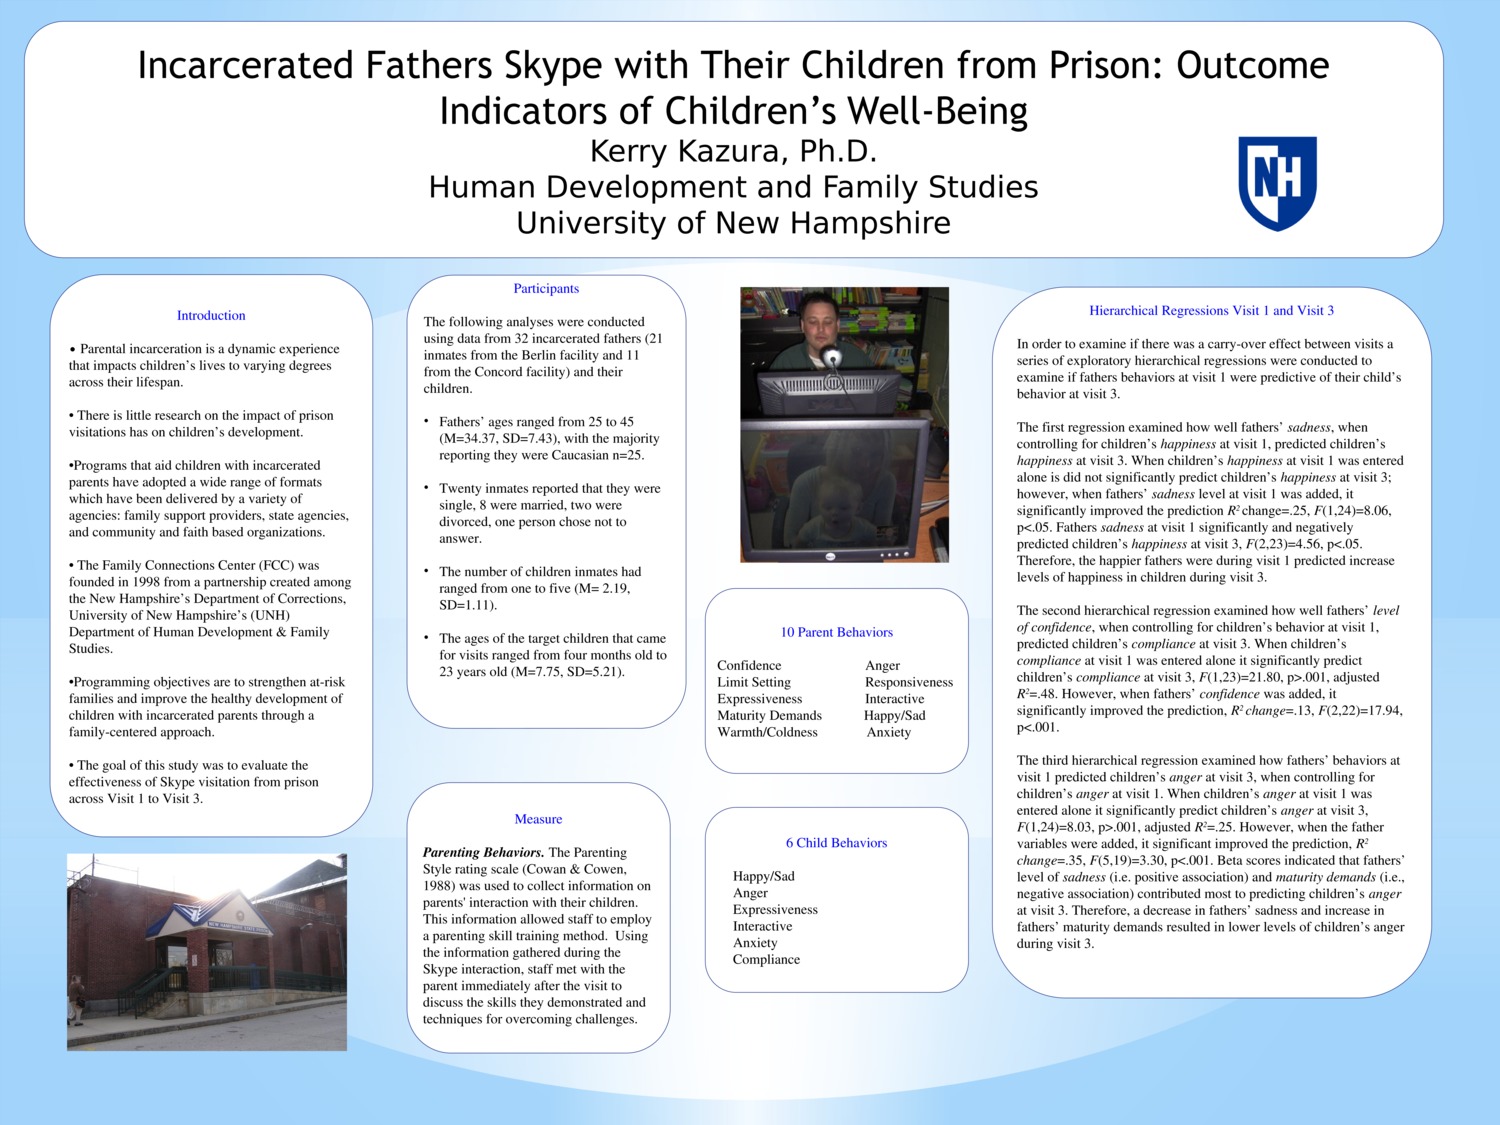 Incarcerated Fathers Skype With Their Children From Prison:  Outcome Indicators Of Children’S Well-Being  by KKazura